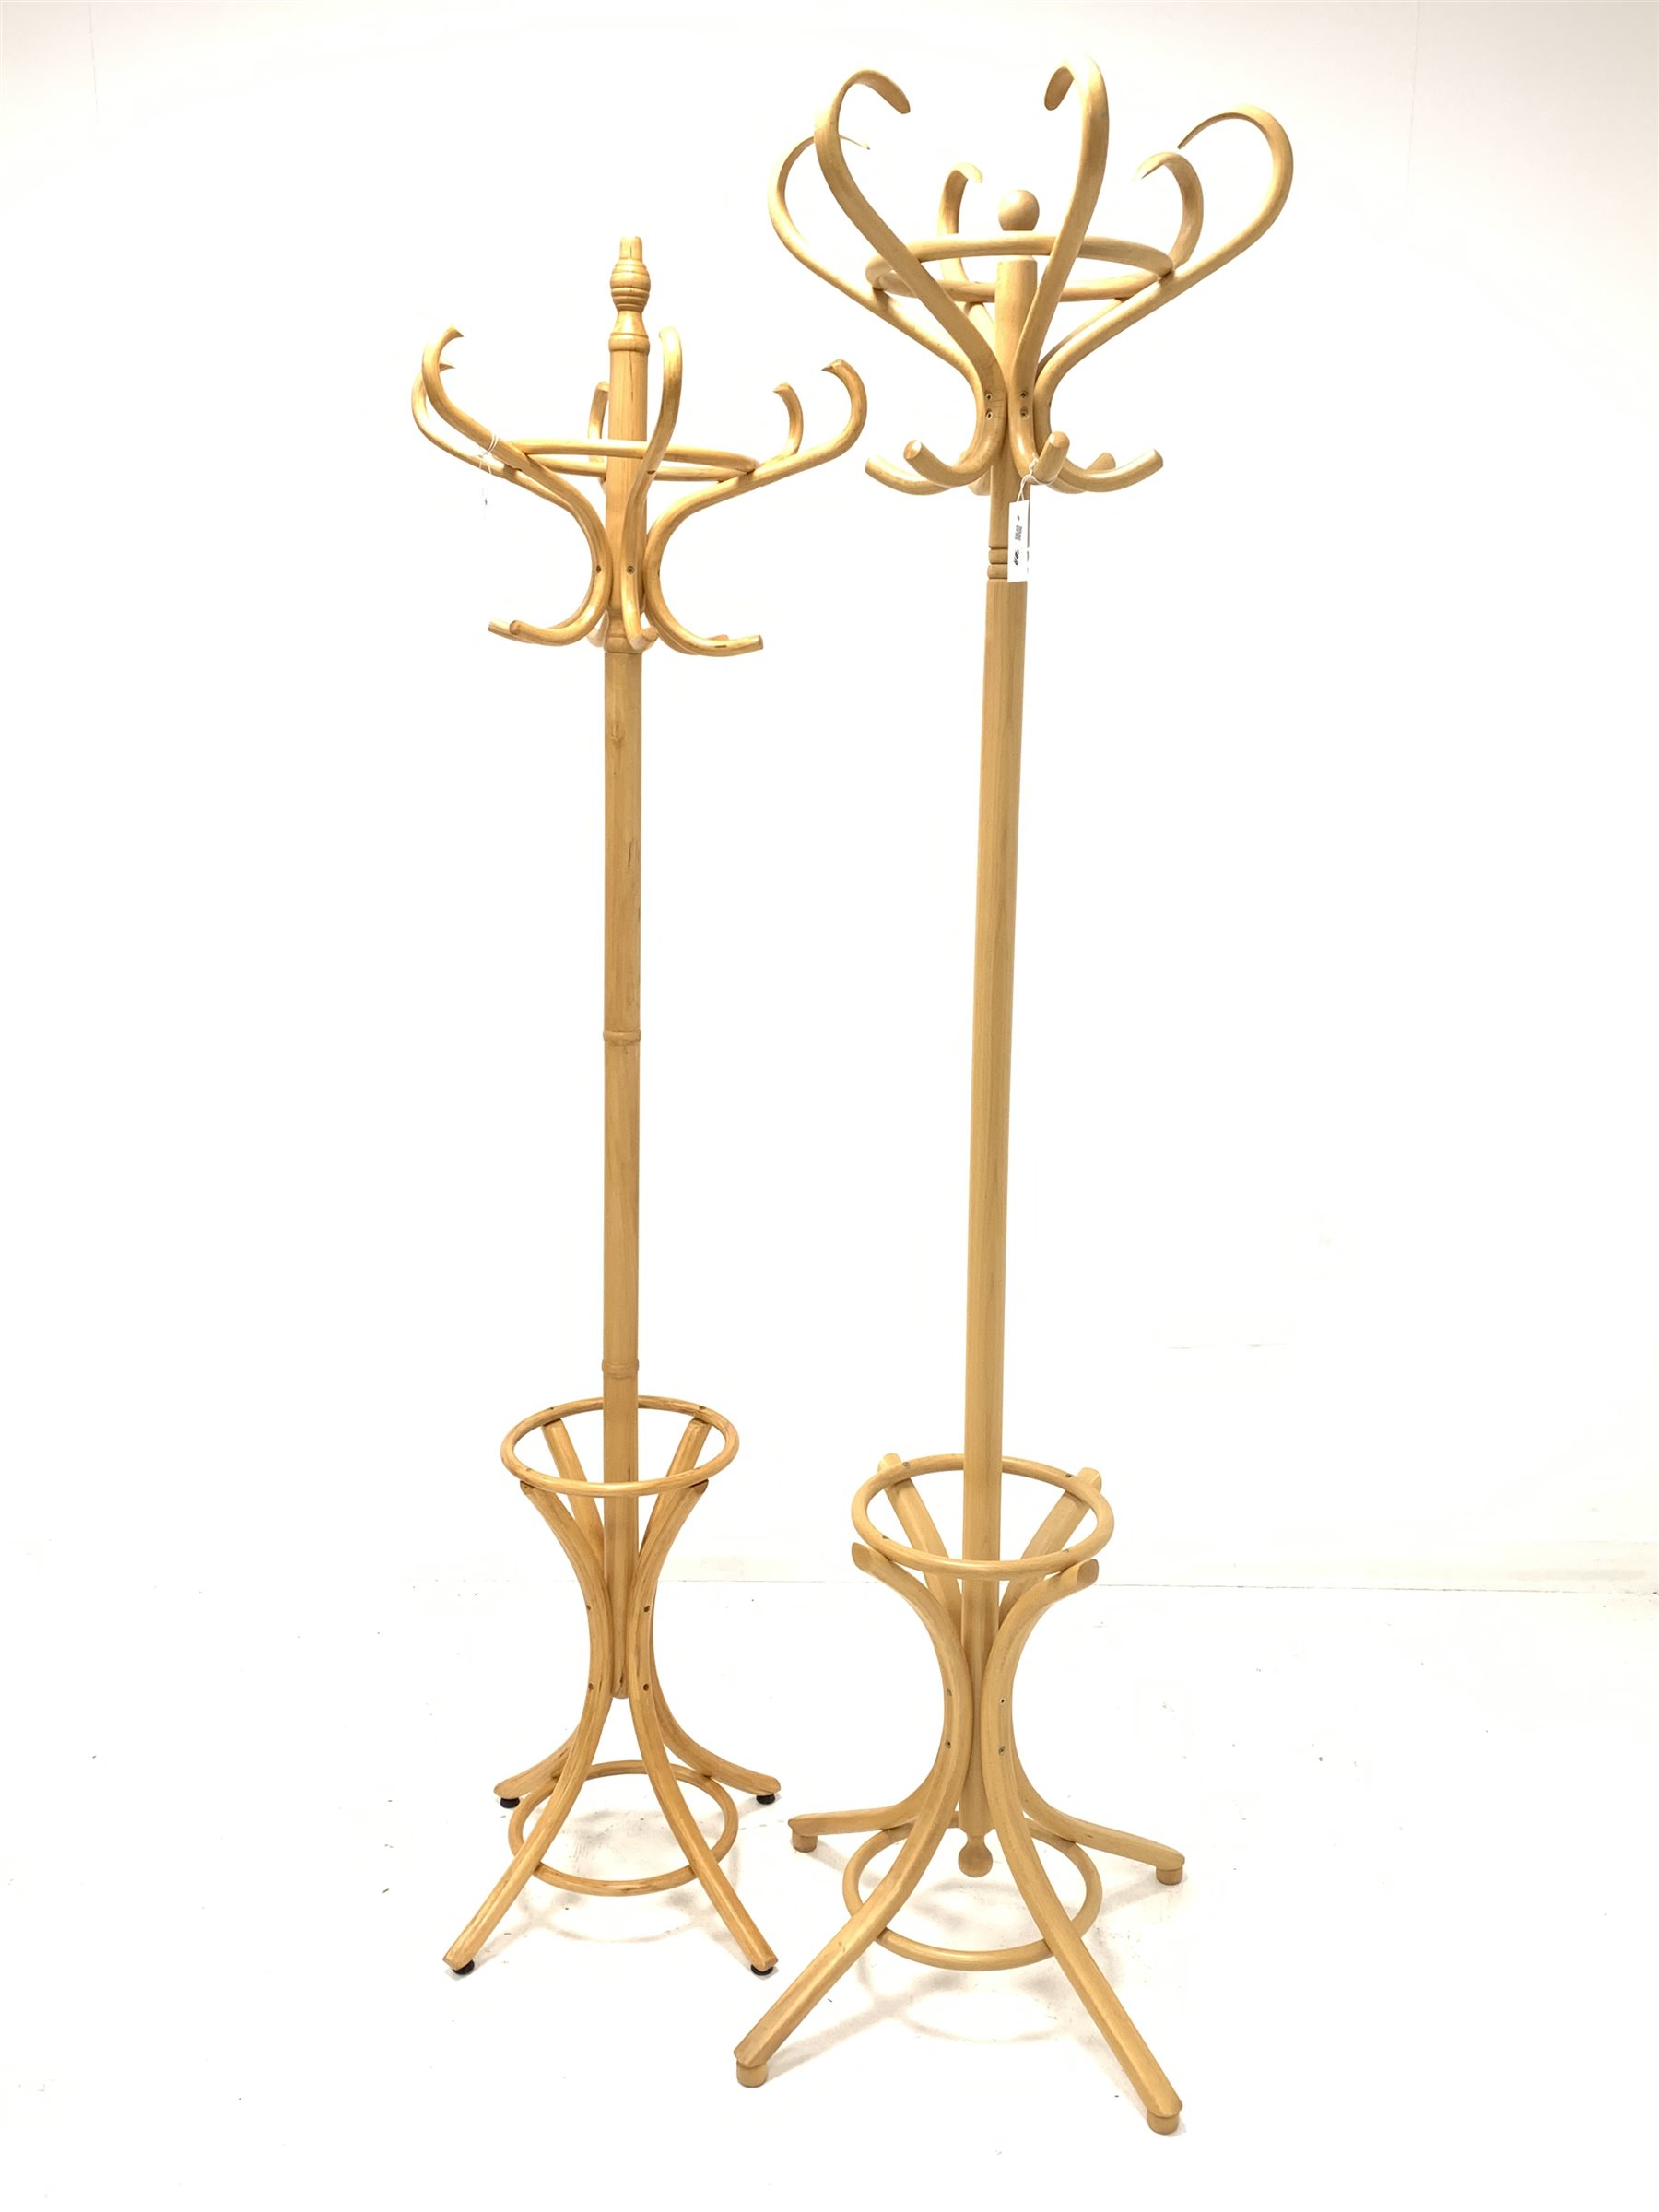 20th century bentwood beech hat and coat stand (H195cm) and another similar